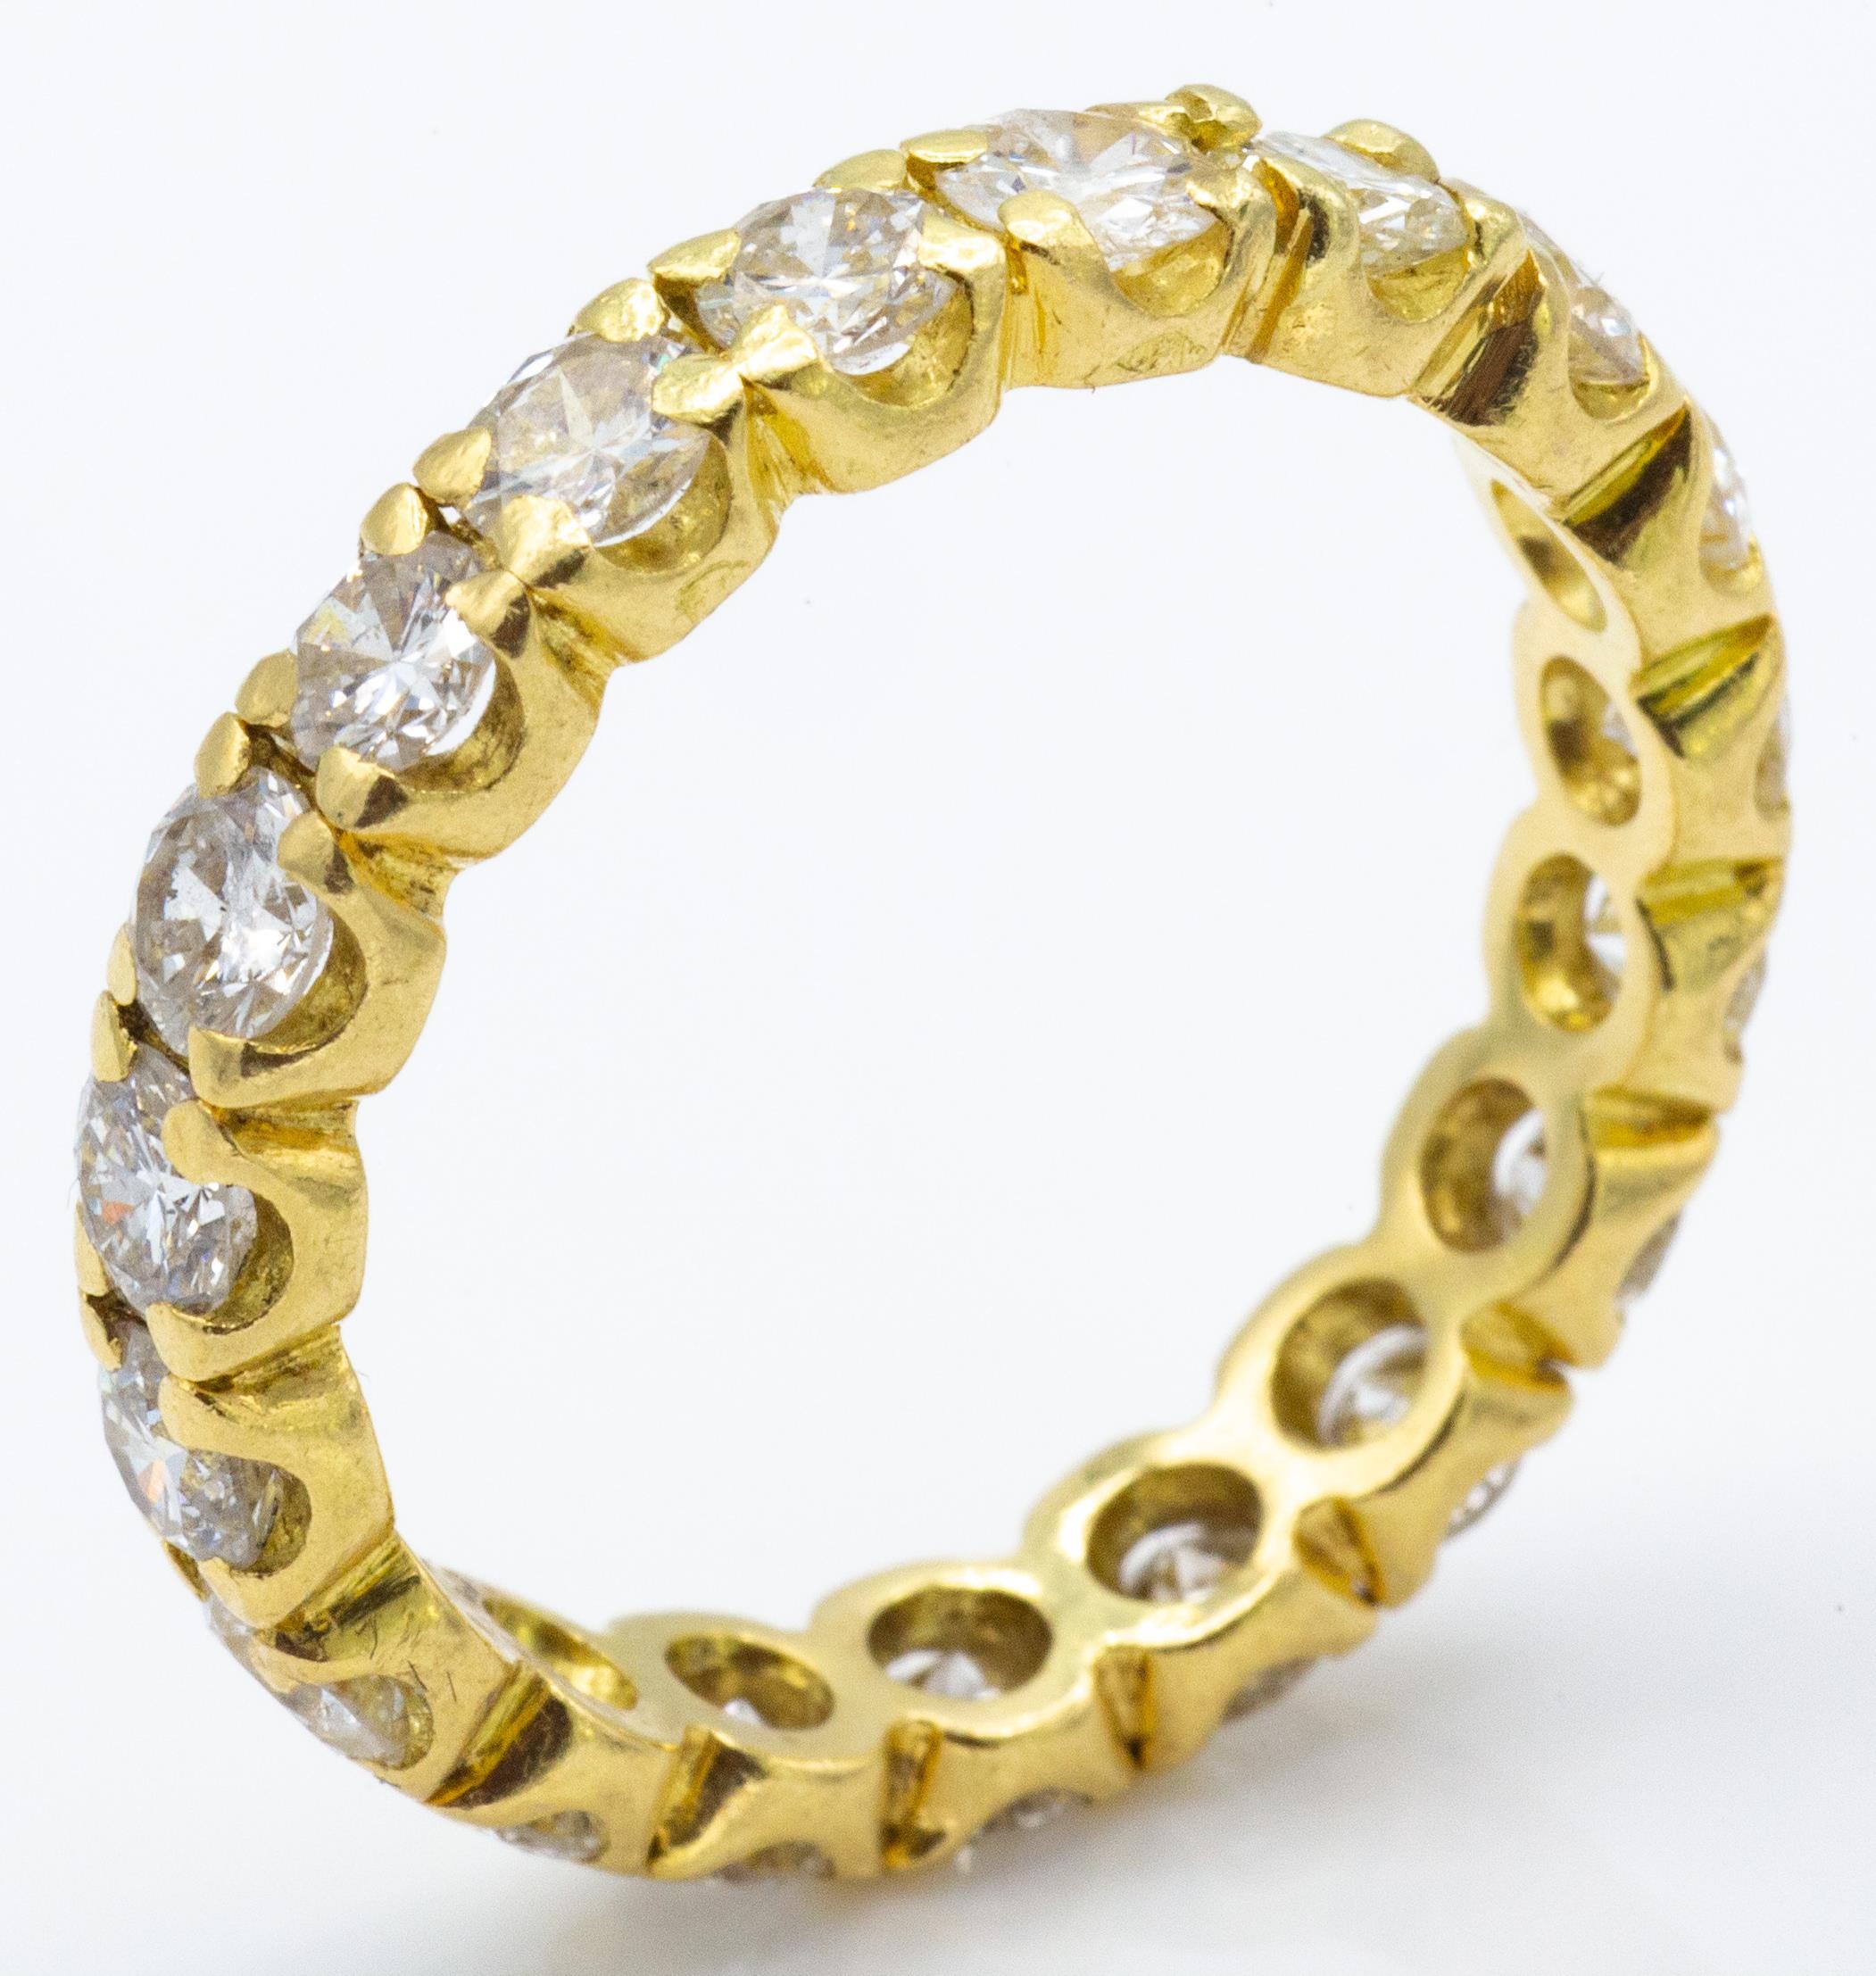 A French 18ct Gold & Diamond Eternity Ring - Image 4 of 4